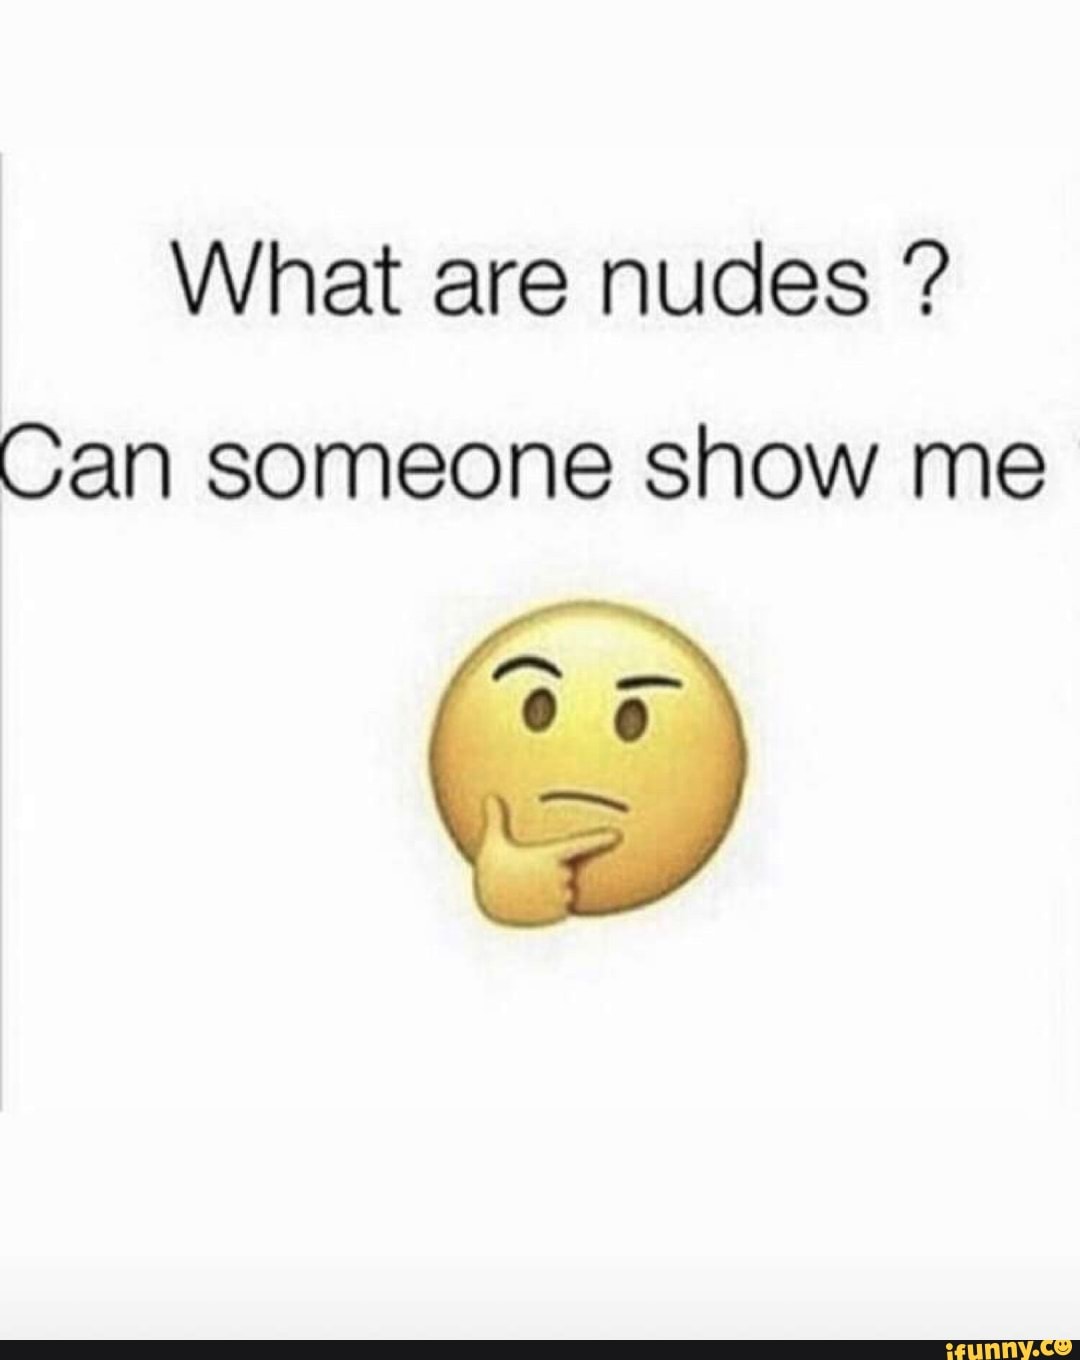 Nudes whats